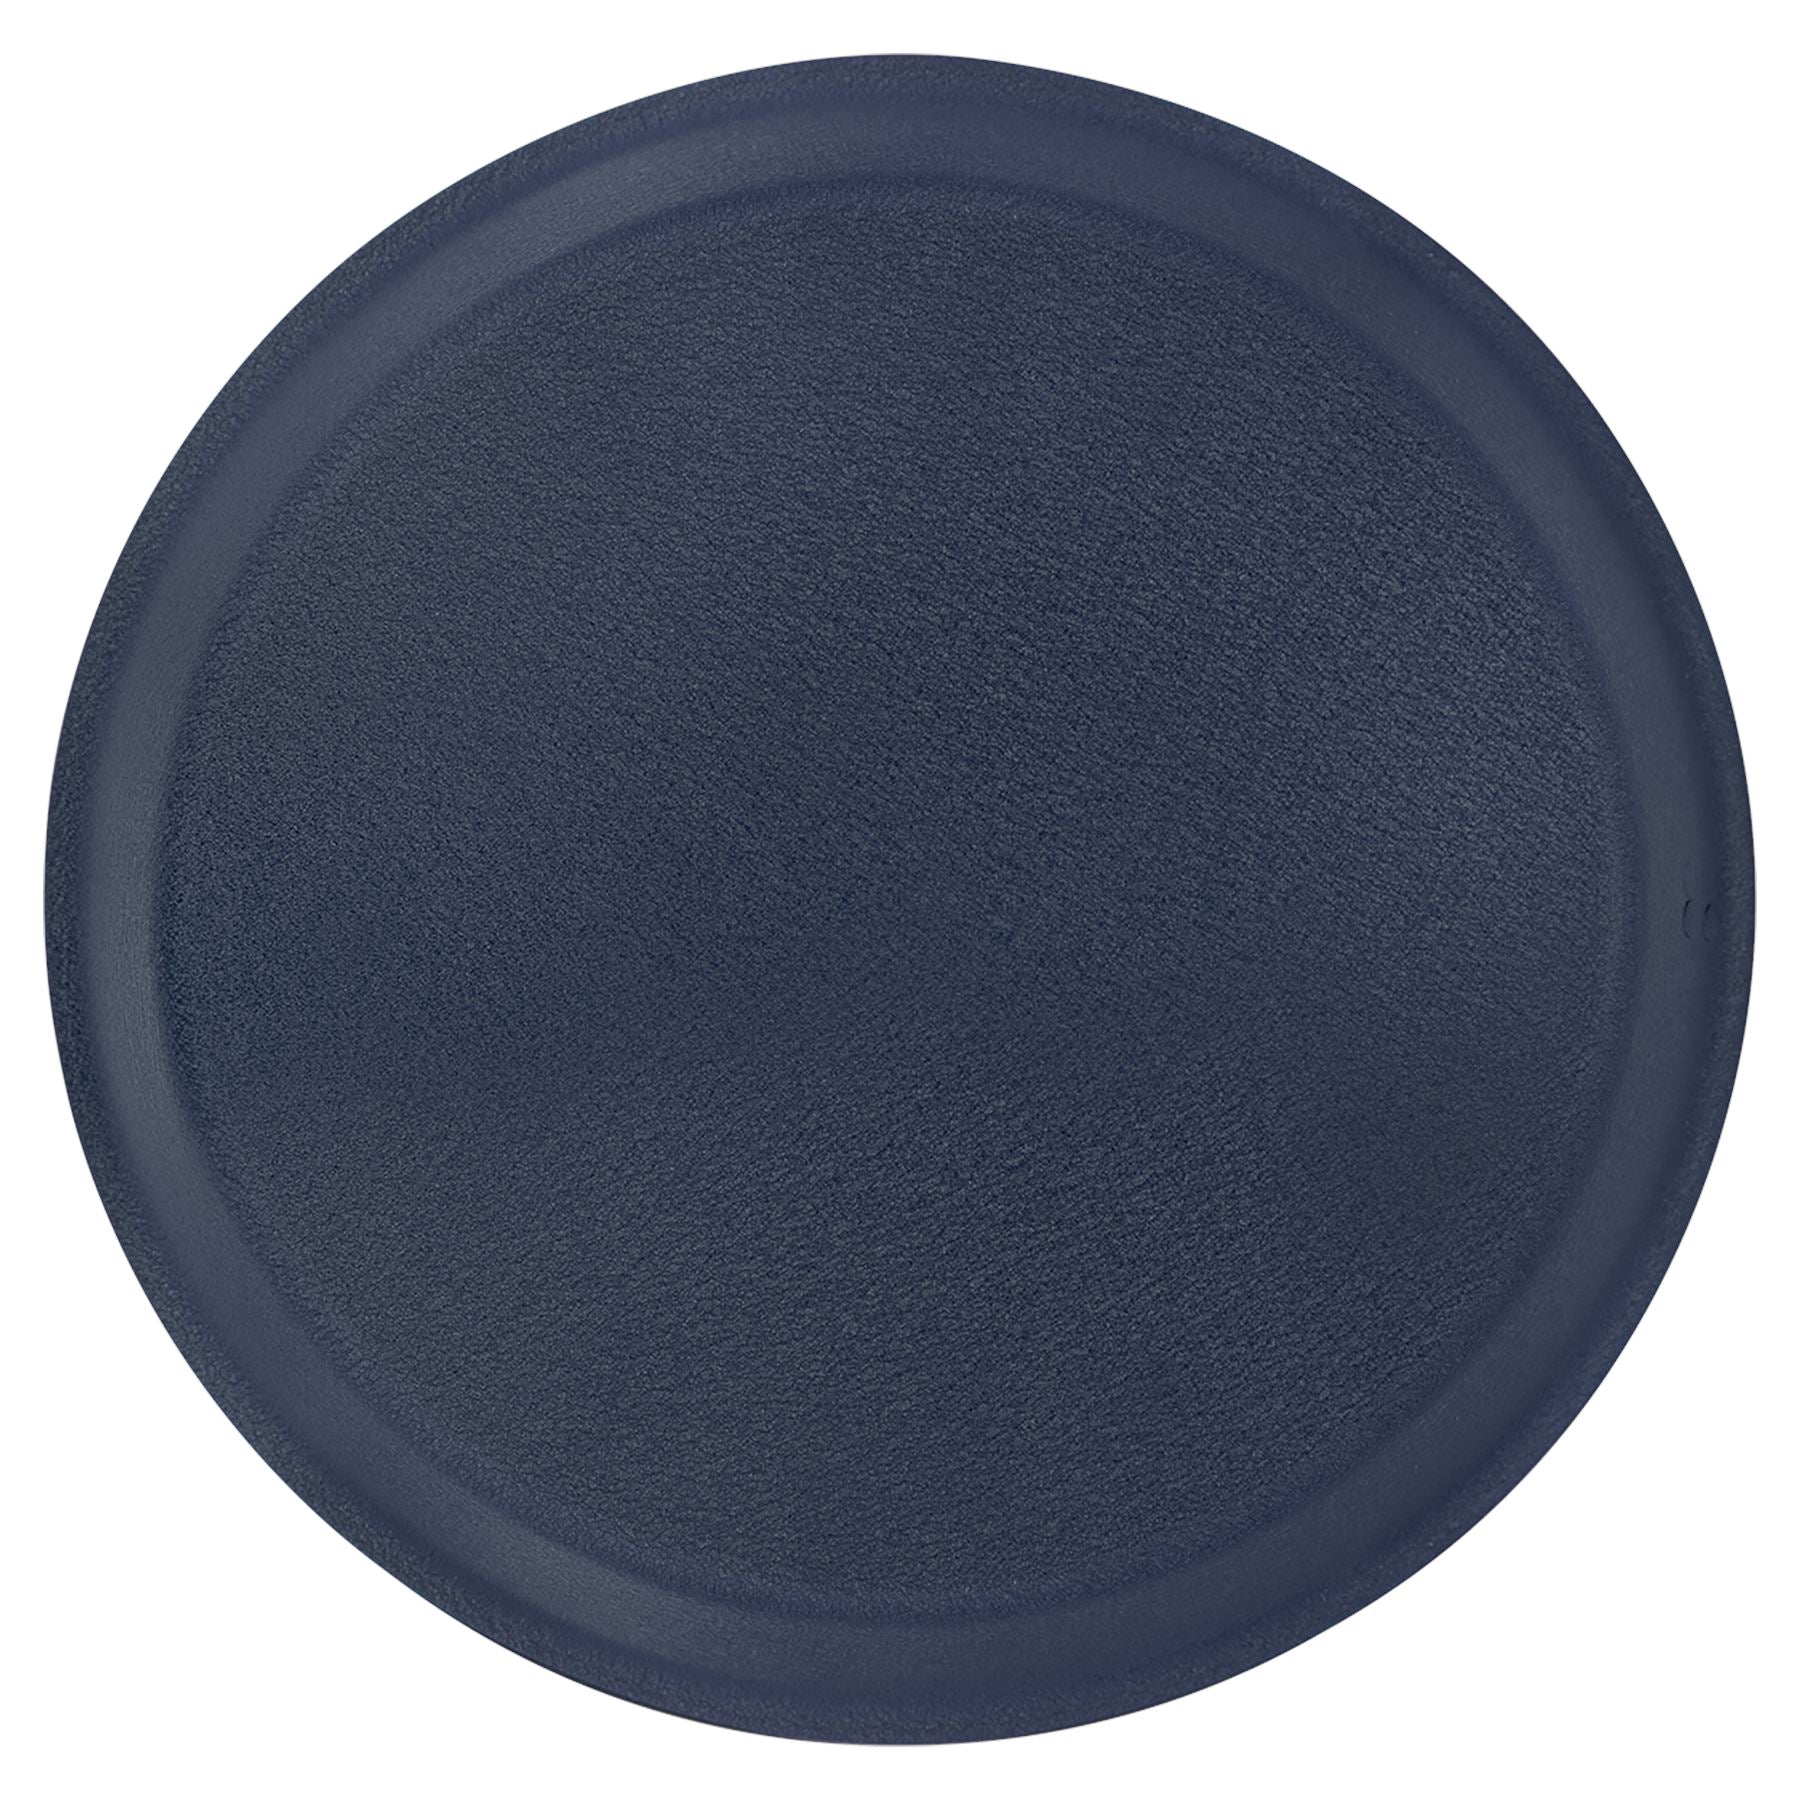 9" Aluminum Pie Pan w/Lid, Laser Engraved Cake Pan Craftworks NW Replacement Lid Only Navy Blue Small